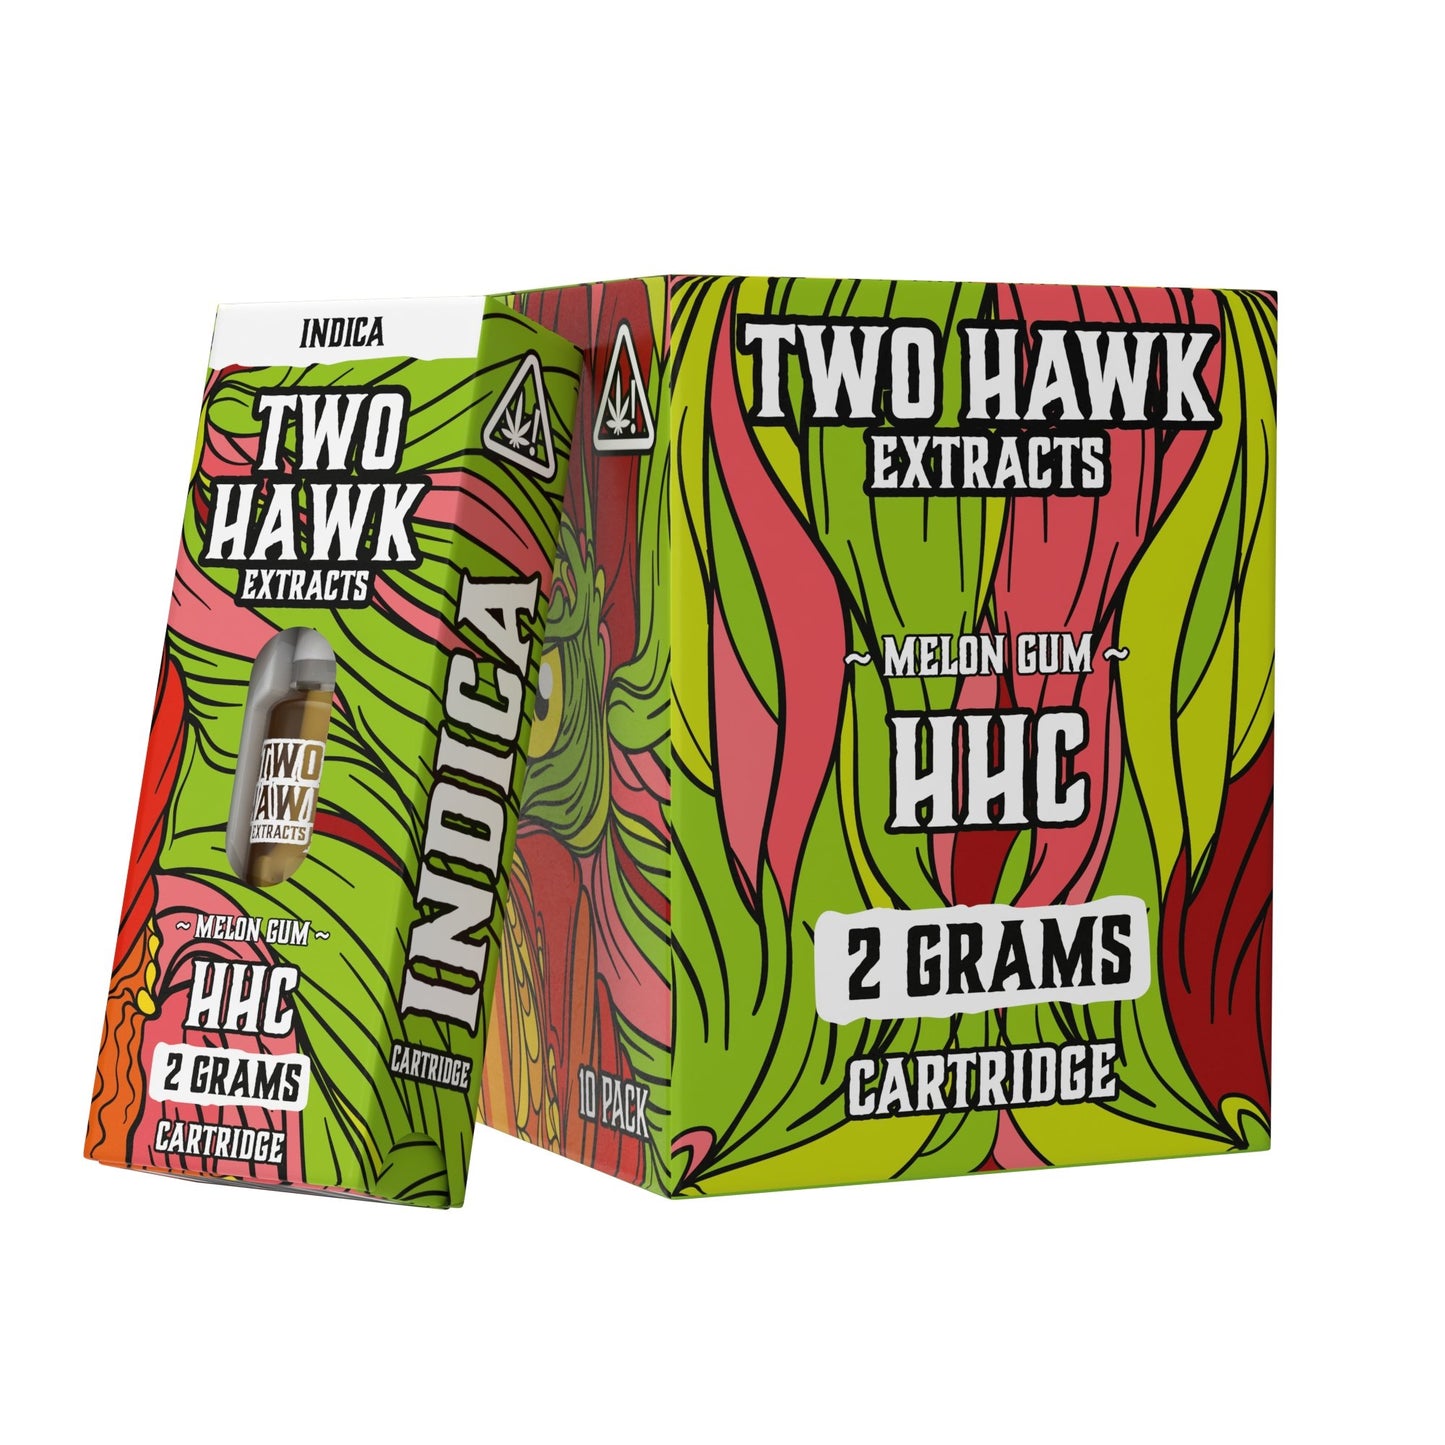 HHC - Melon Gum (indica hybrid) - 2 GRAM - Cart Single box & 10 pack - Two Hawk Extracts